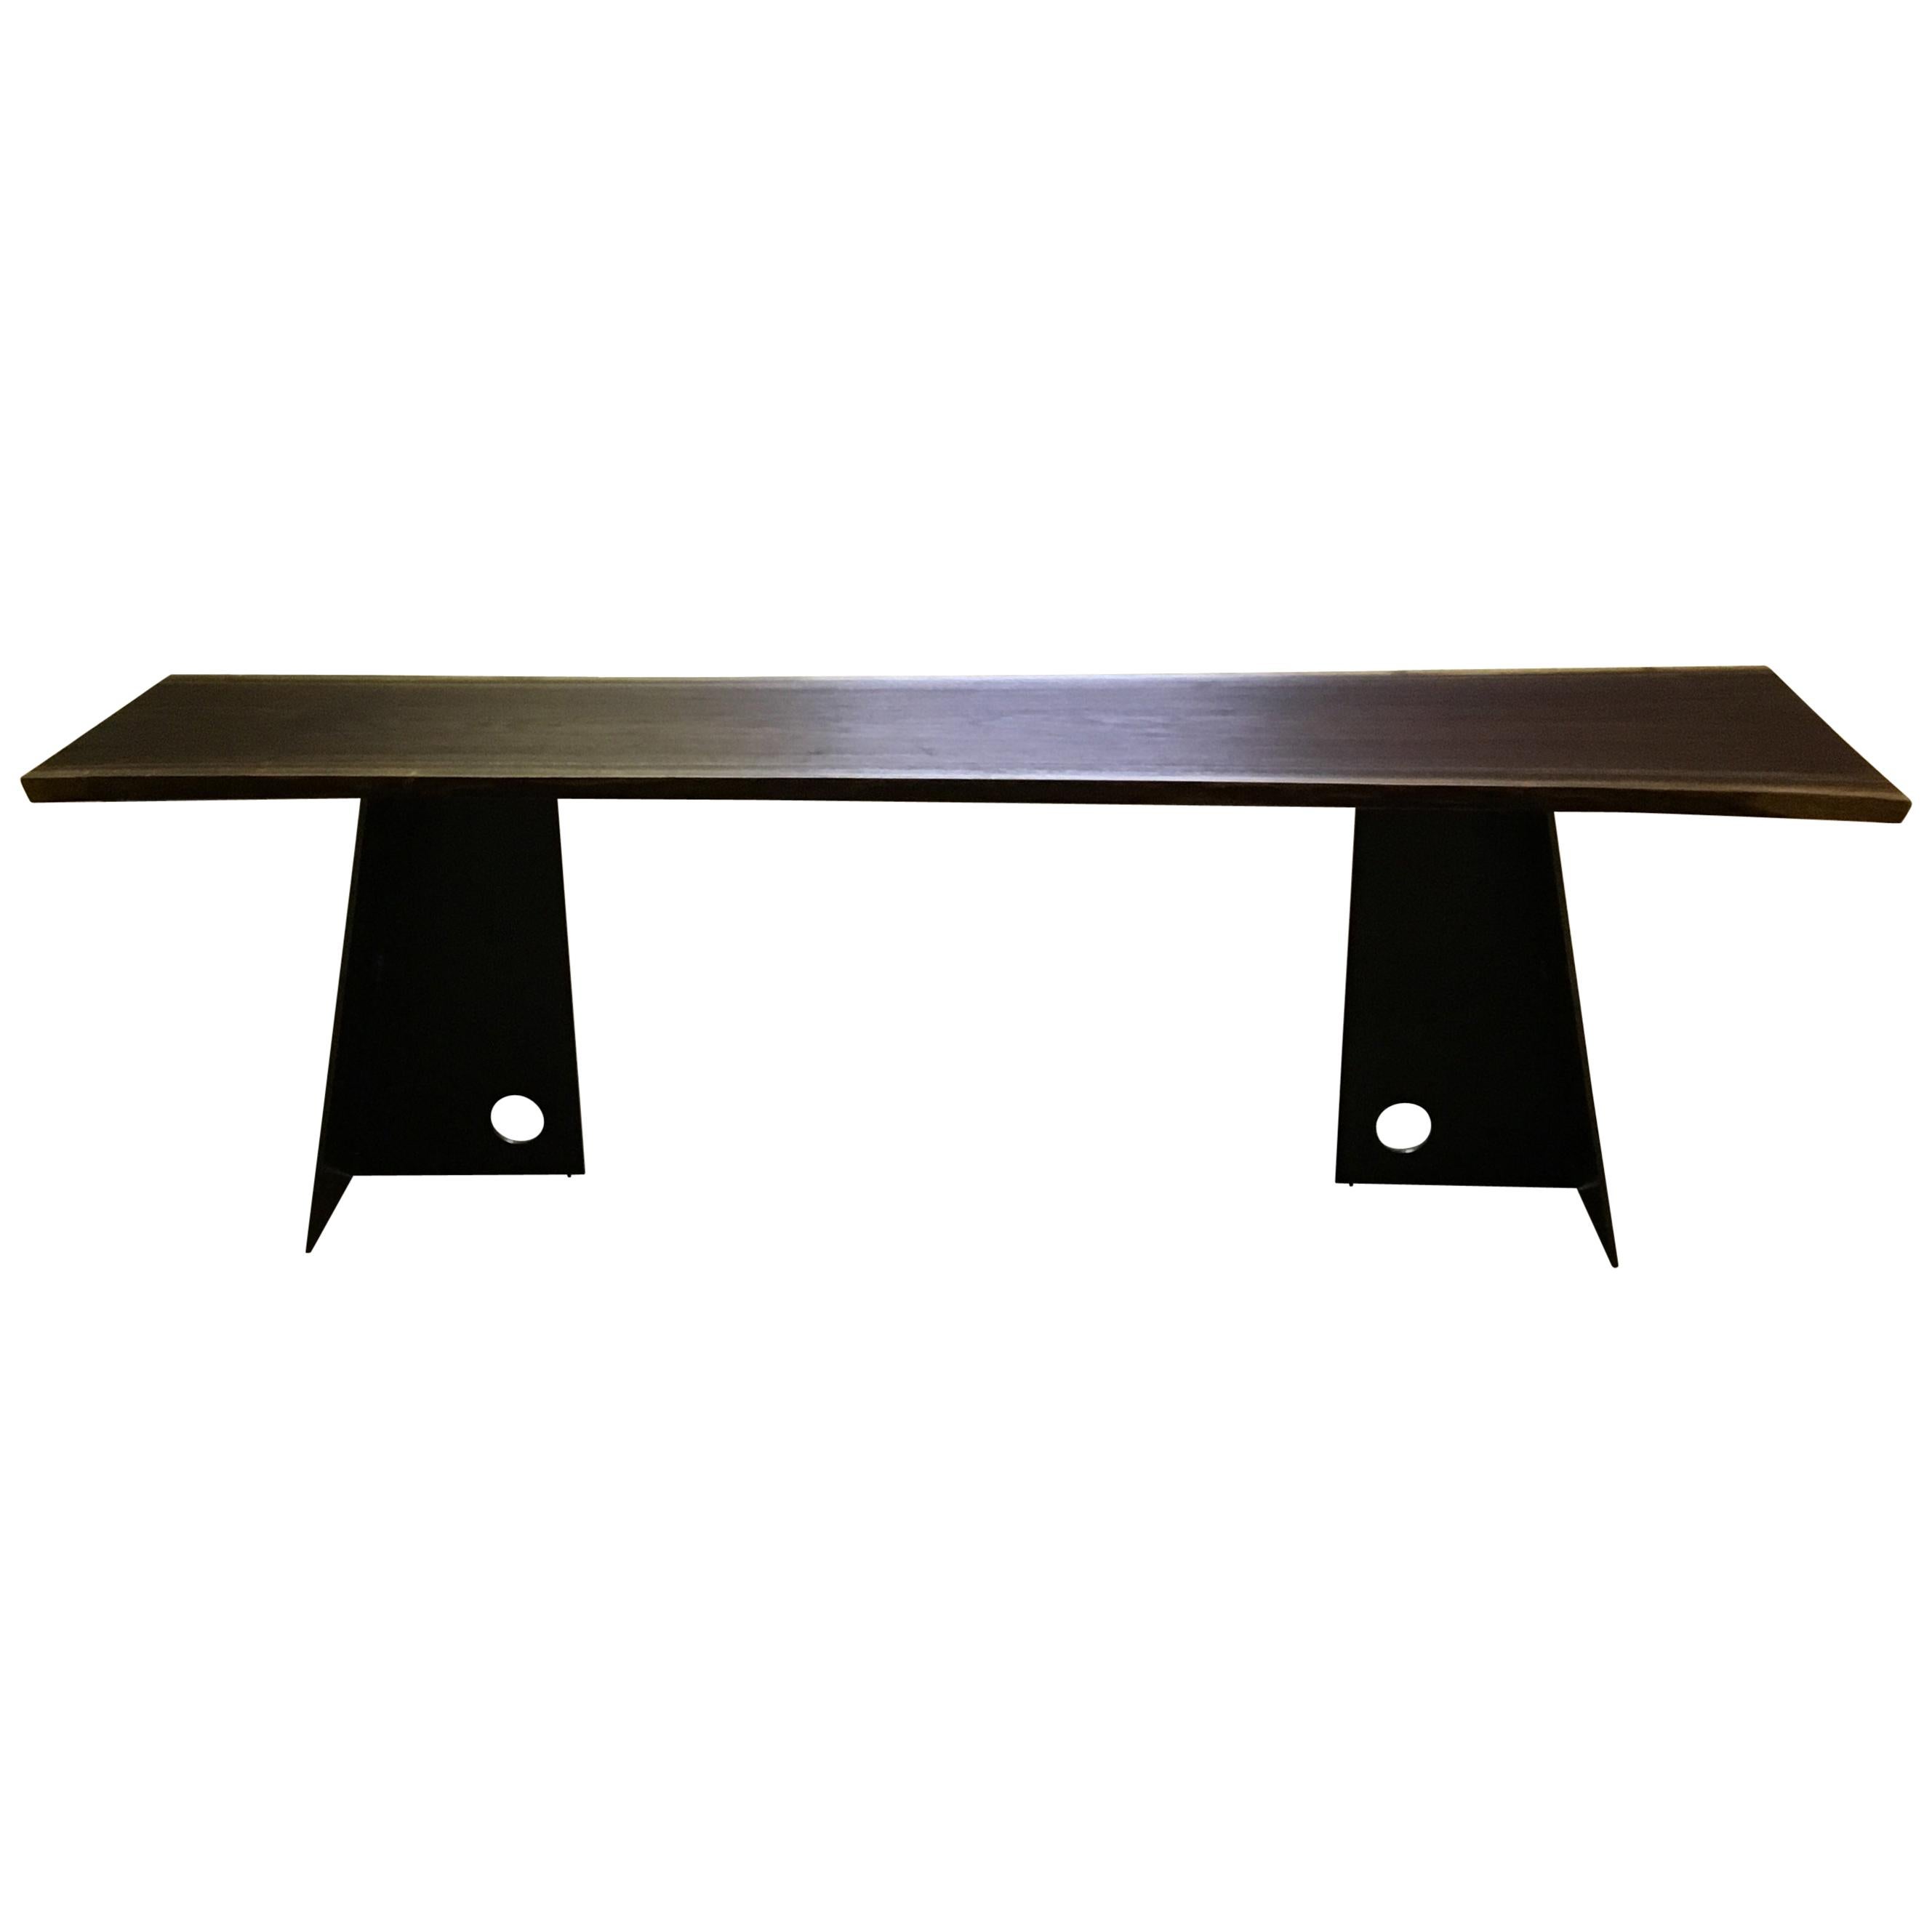 Contemporary Blackened Steel and Walnut Console Table by Scott Gordon